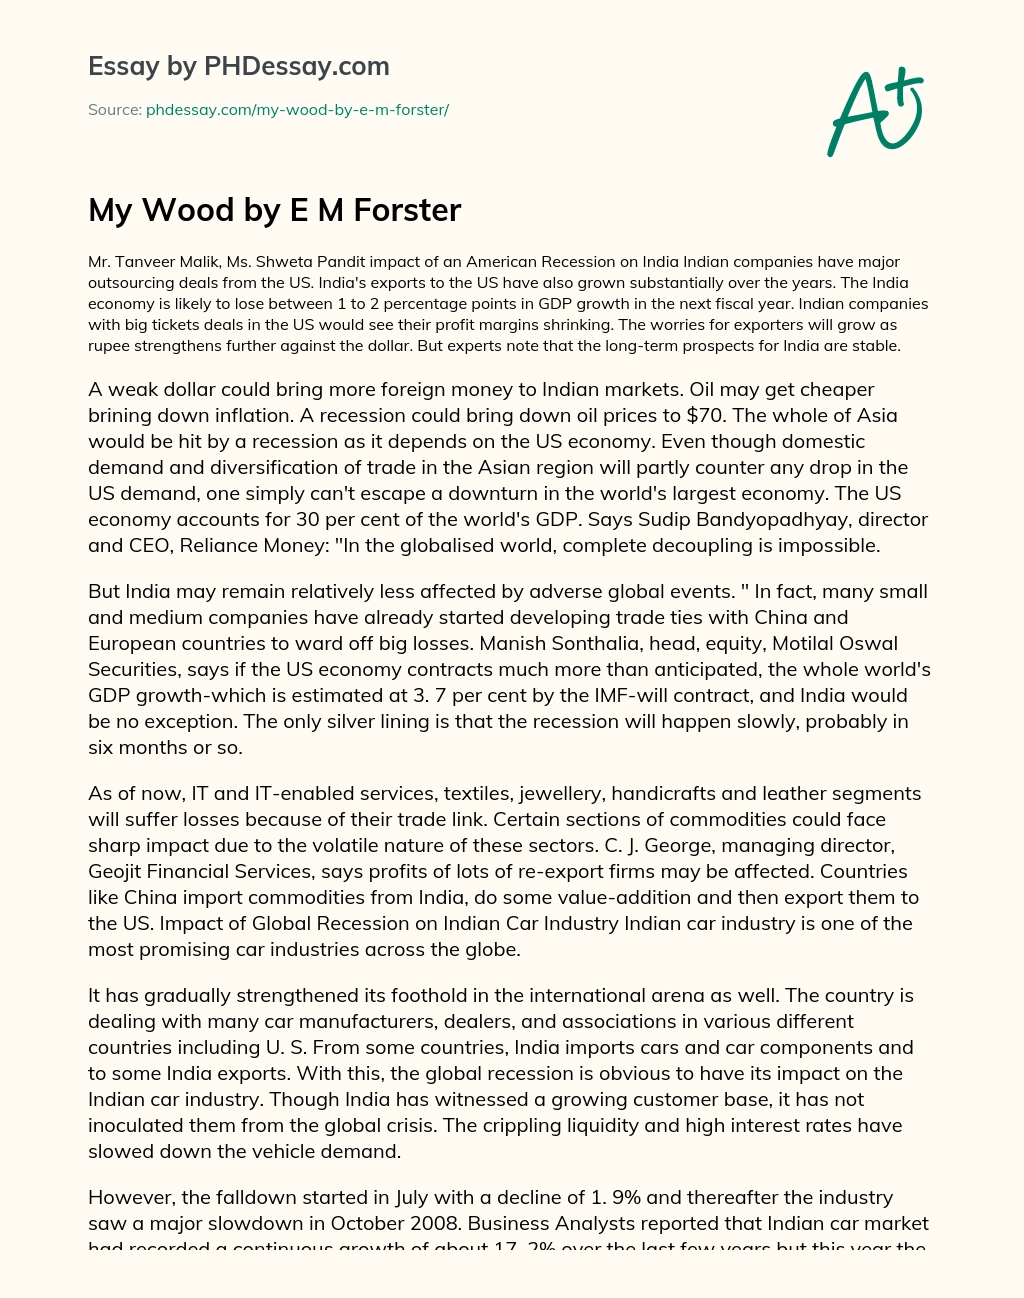 My Wood by E M Forster essay